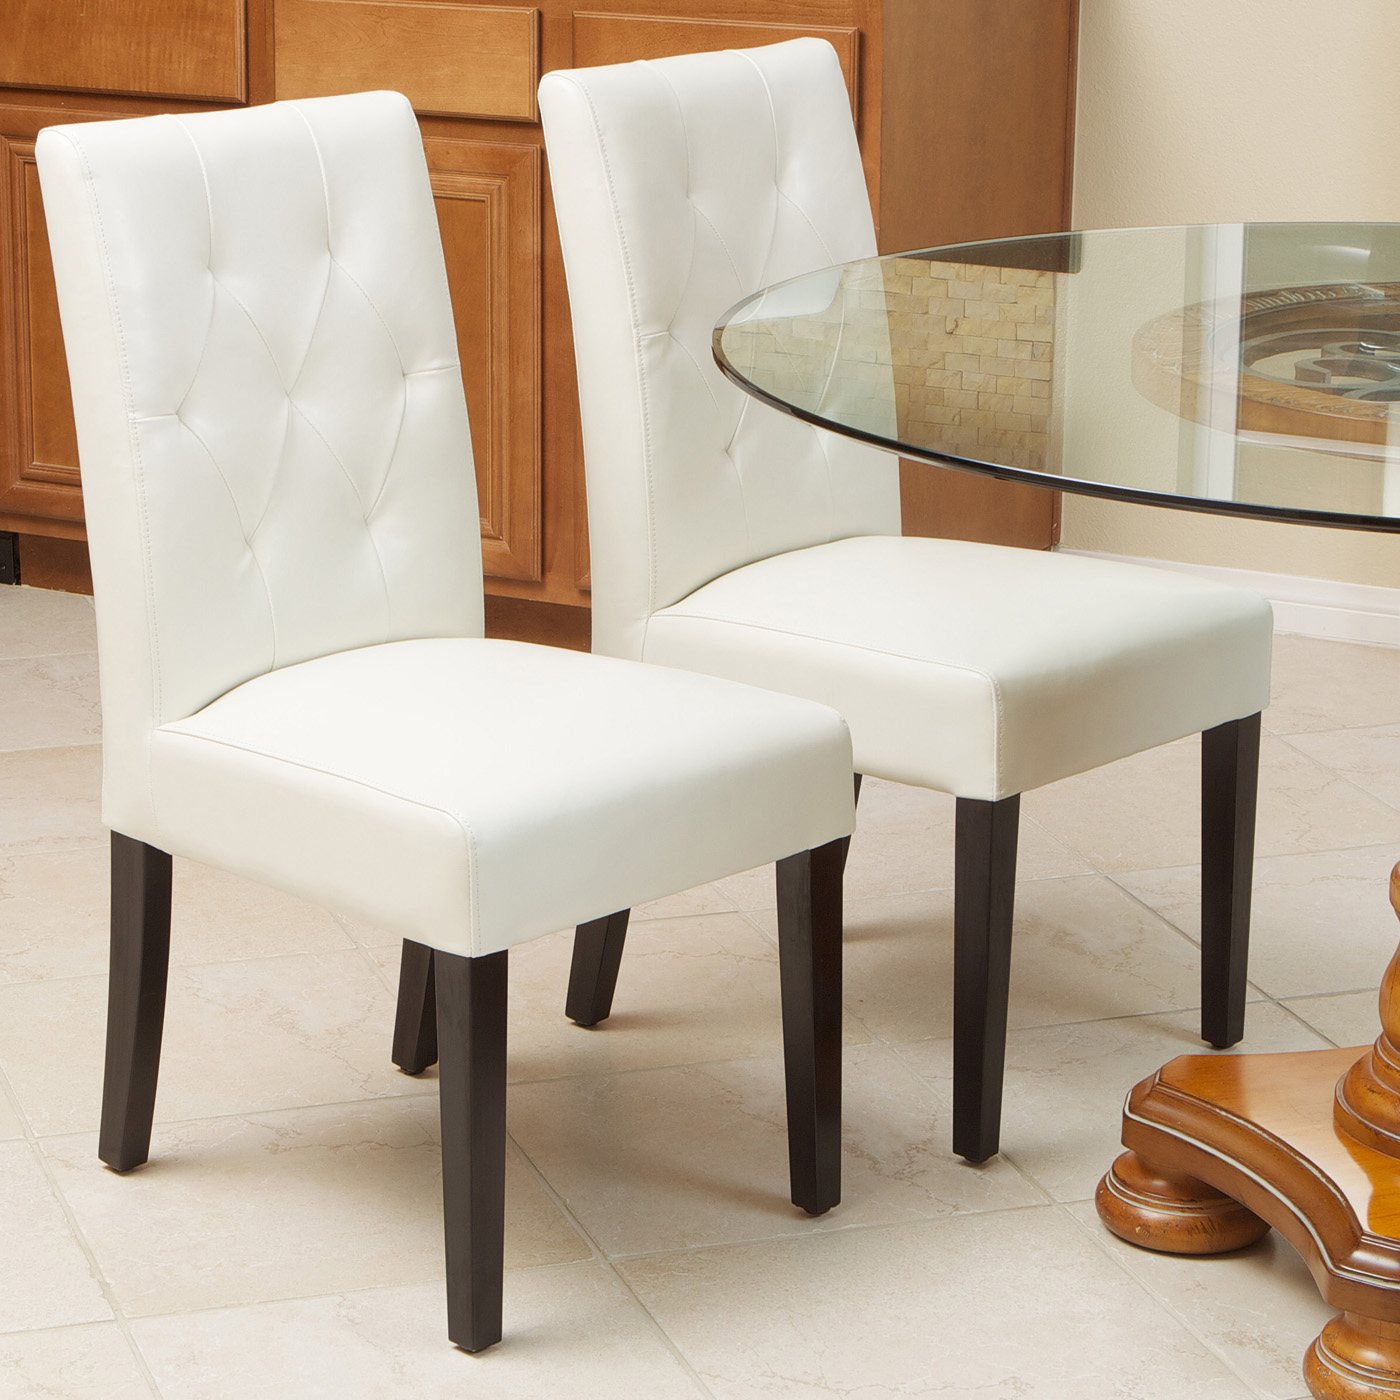 Best Selling Home Decor Set of 2 Gentry White Side Chairs in the Dining